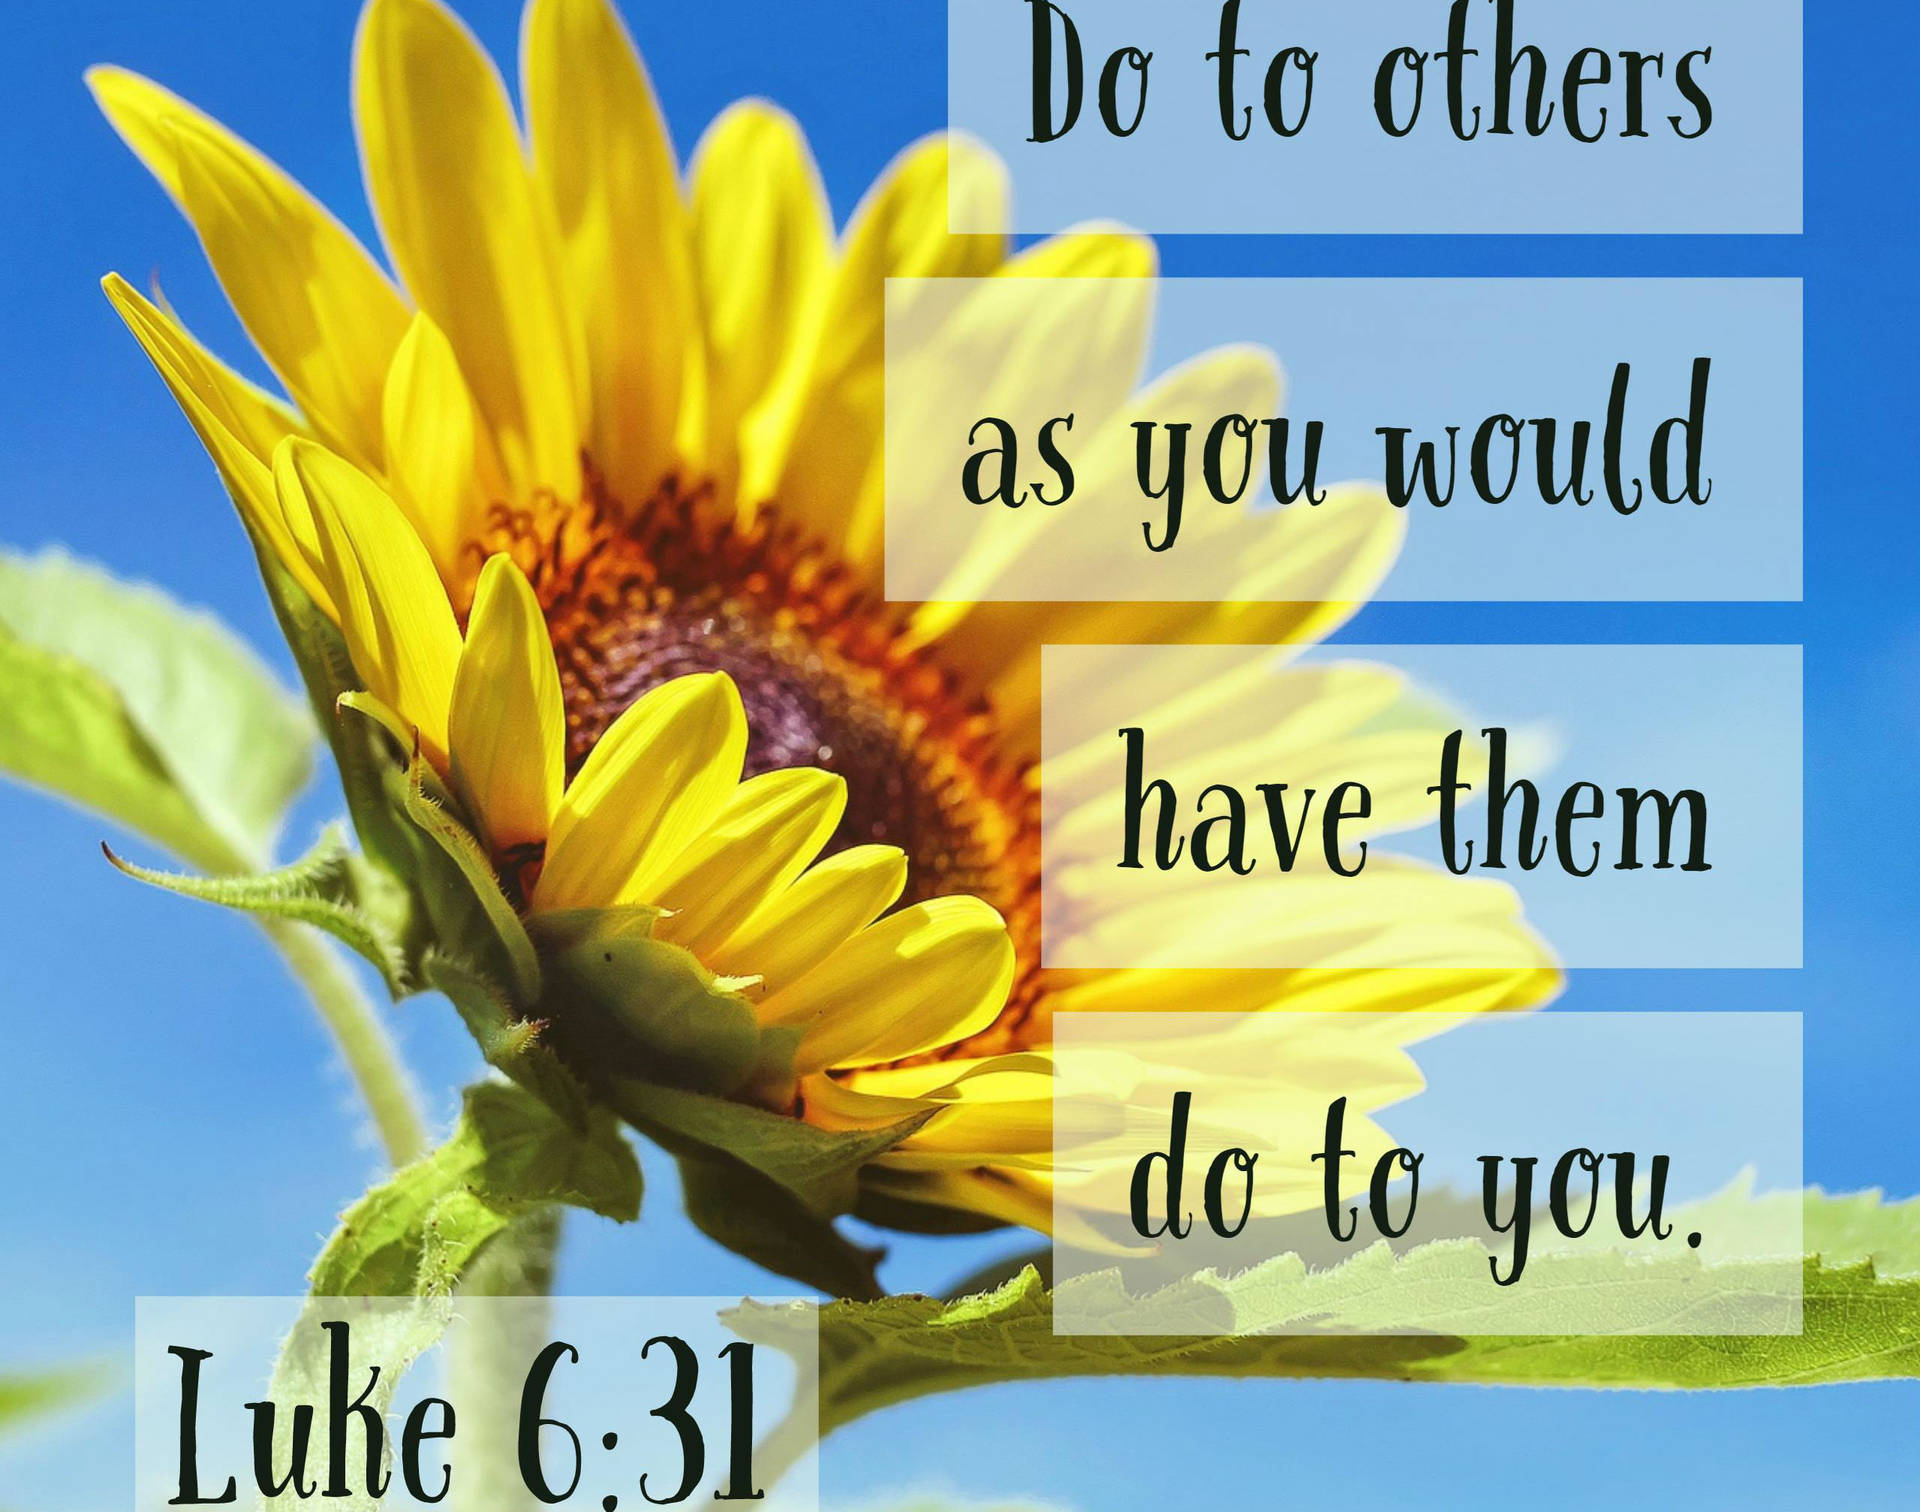 Golden Rule Bible Quote